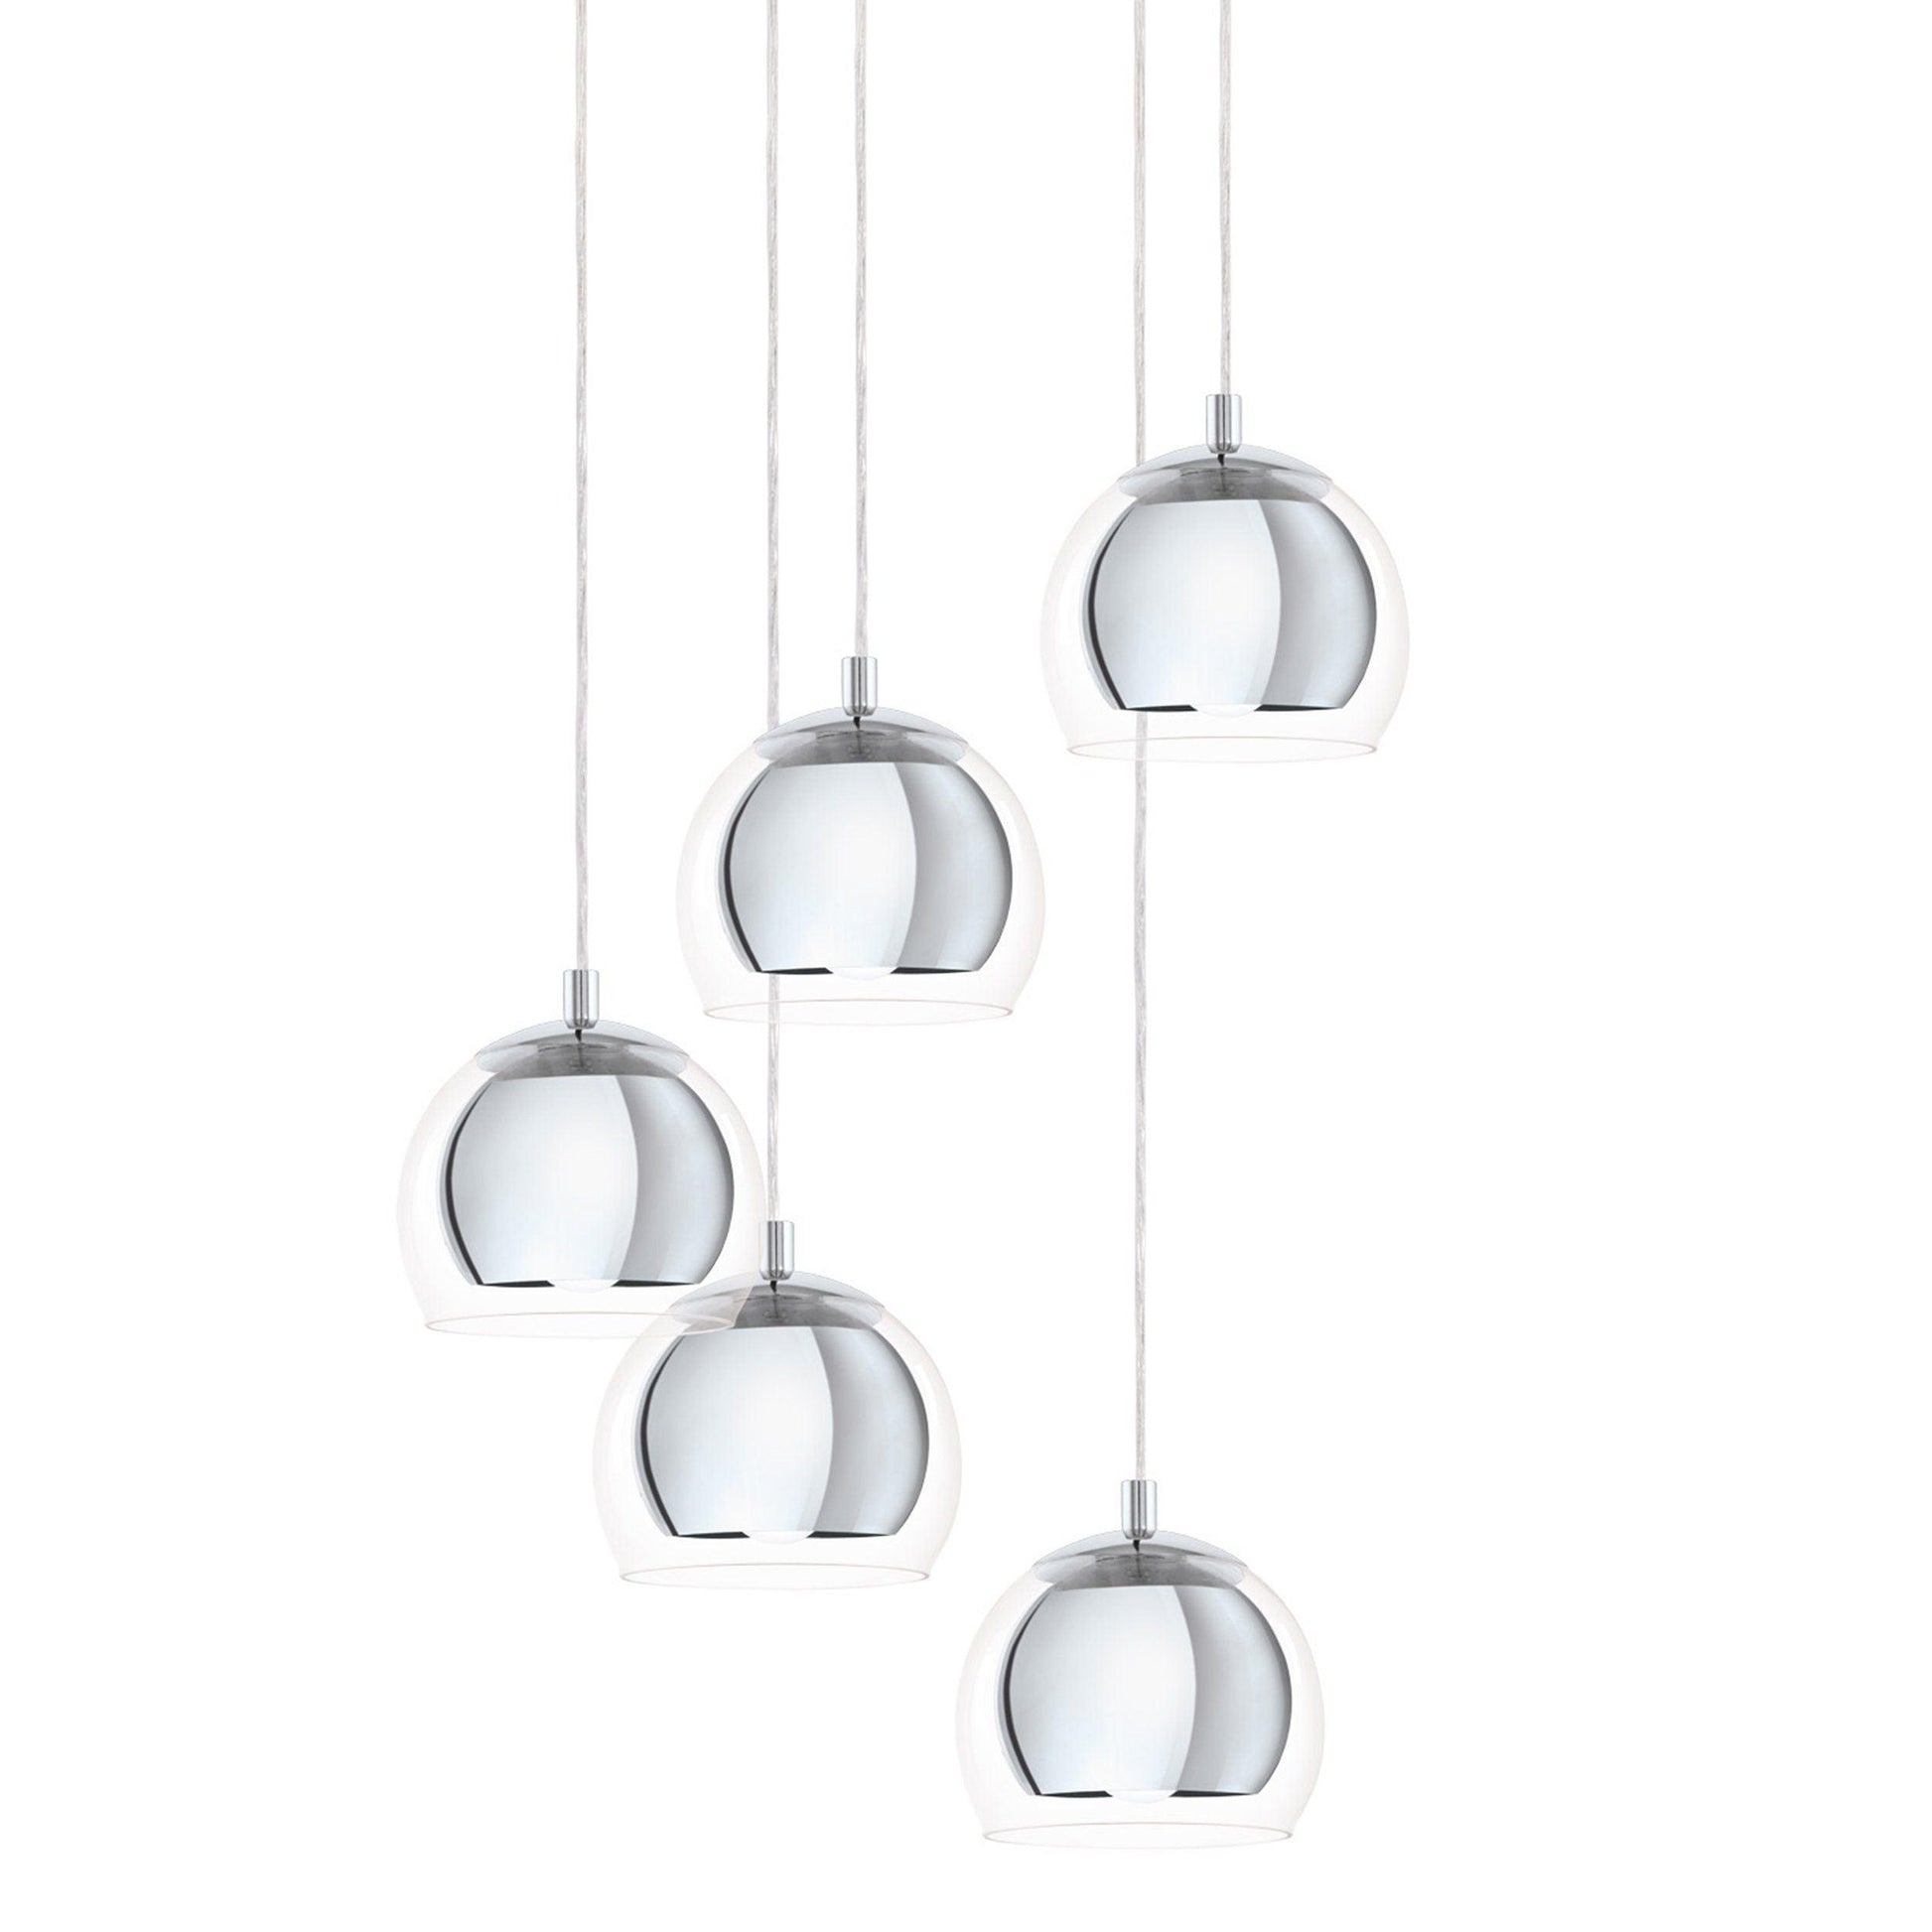 ROCAMAR Pendant Light by The Light Library